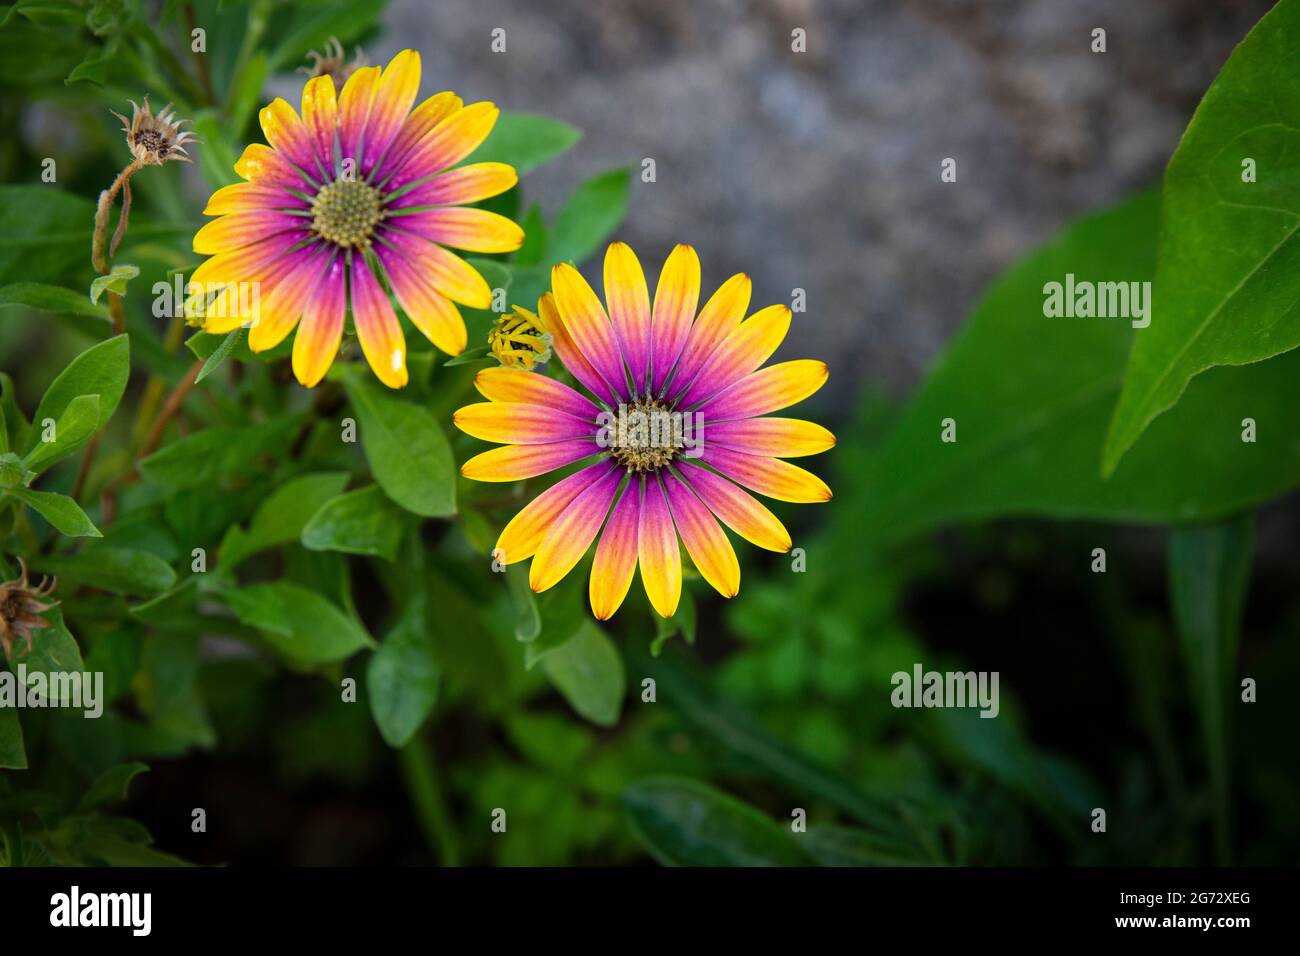 Close up of African daisies with brilliant yellow and purple colors and green leaves. Stock Photo